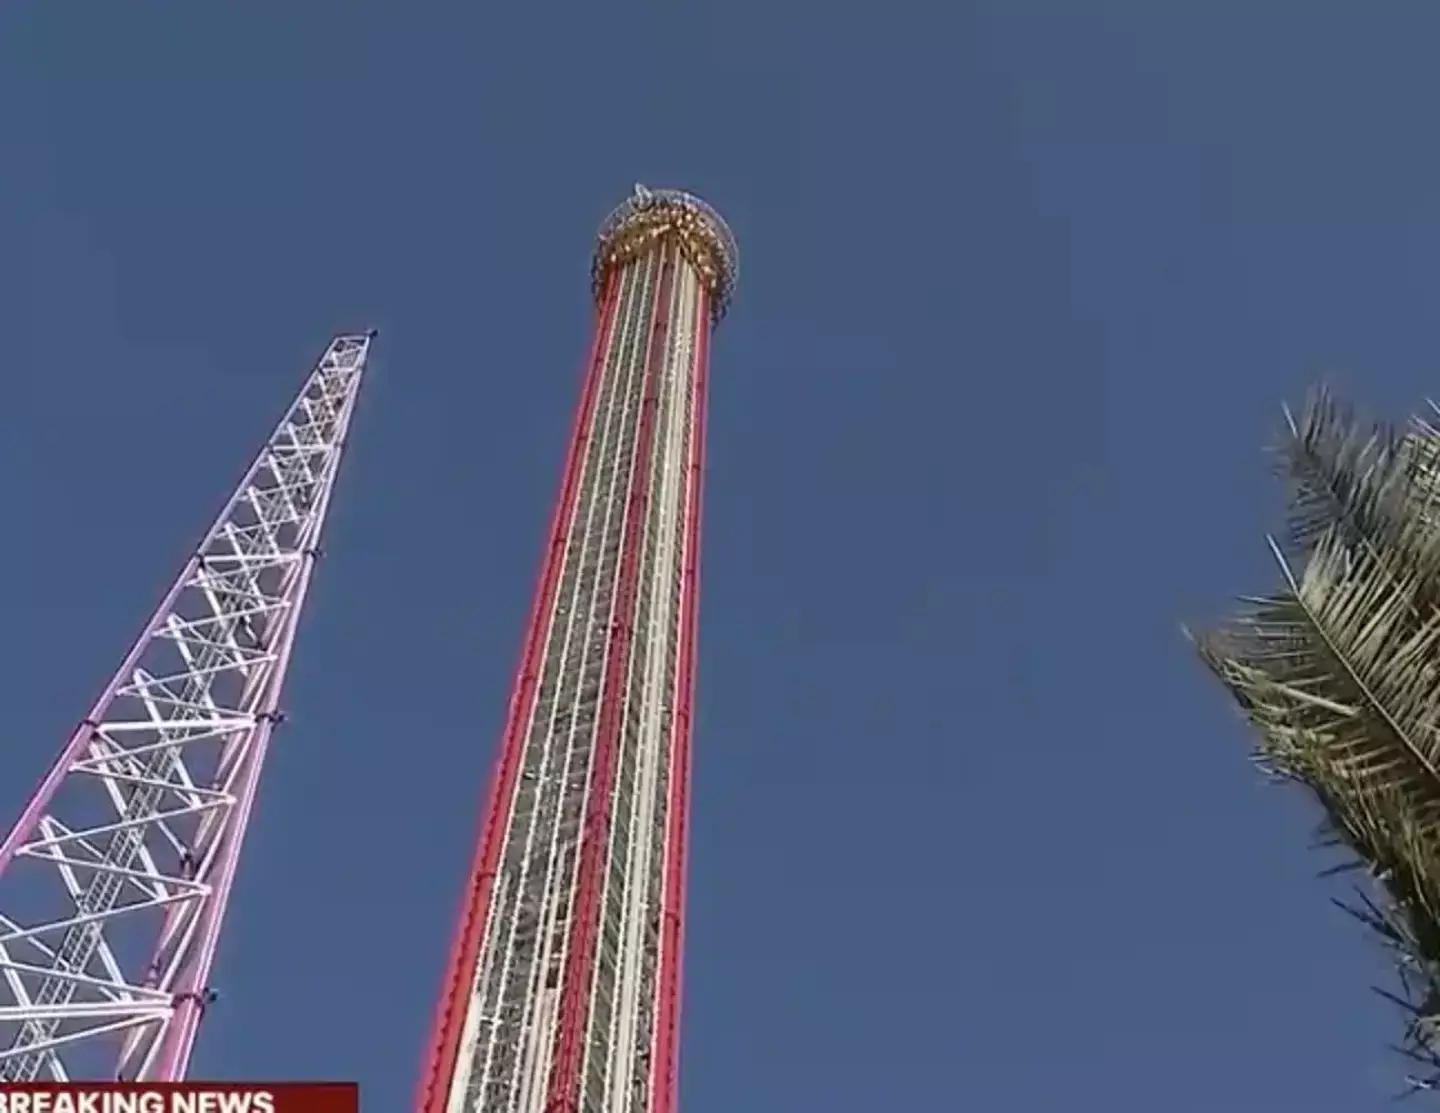 The teenager fell to his death from this ride.